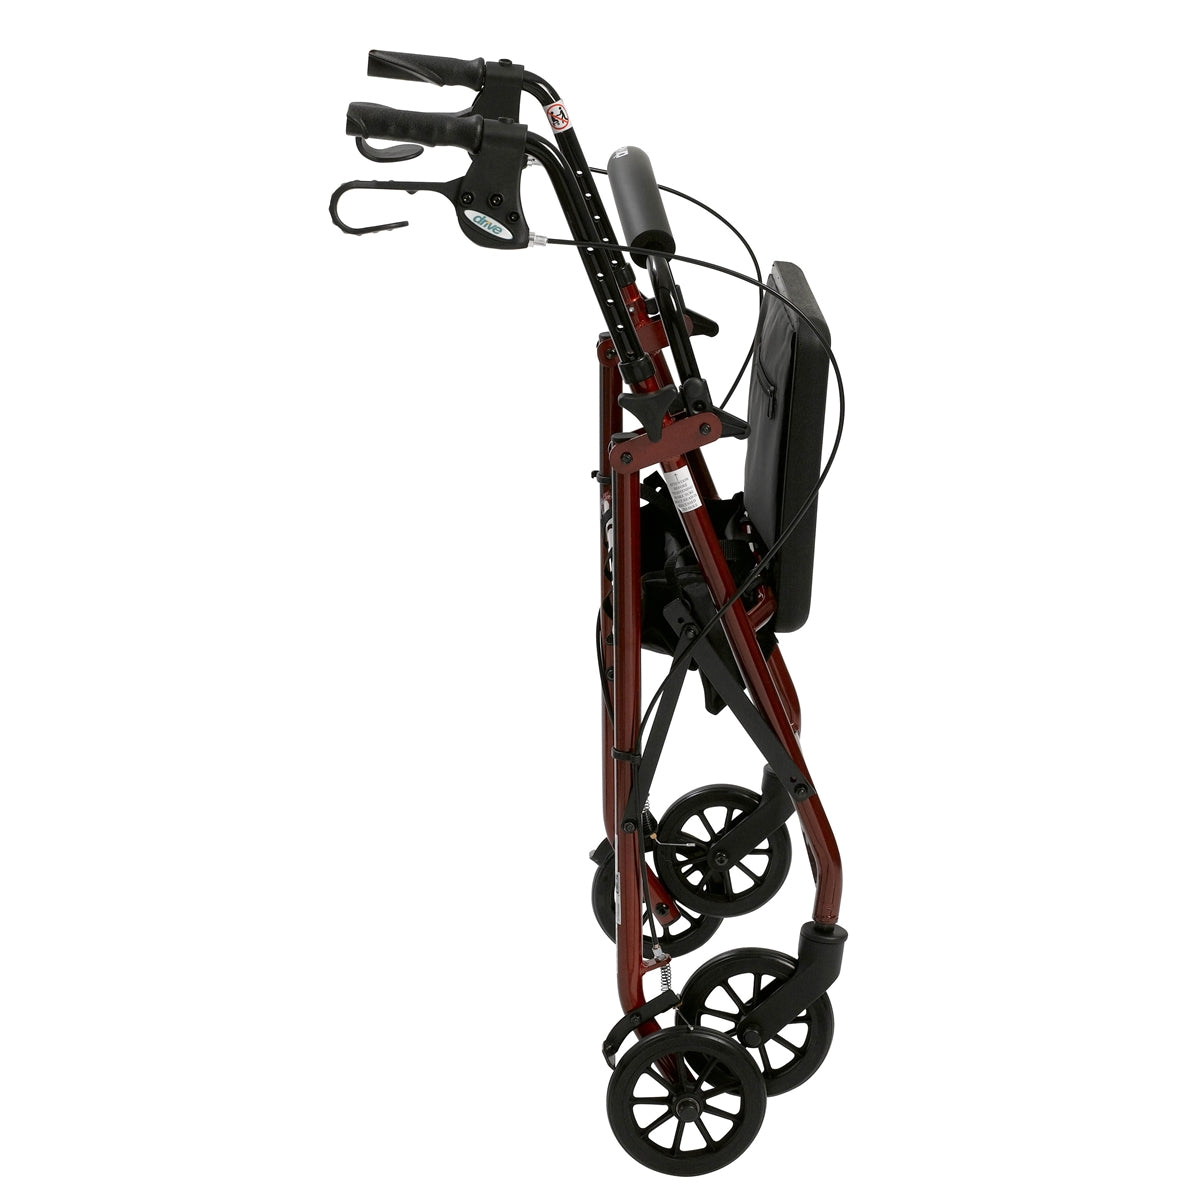 Walker Rollator with 6" Wheels, Fold Up Removable Back Support, and Padded Seat